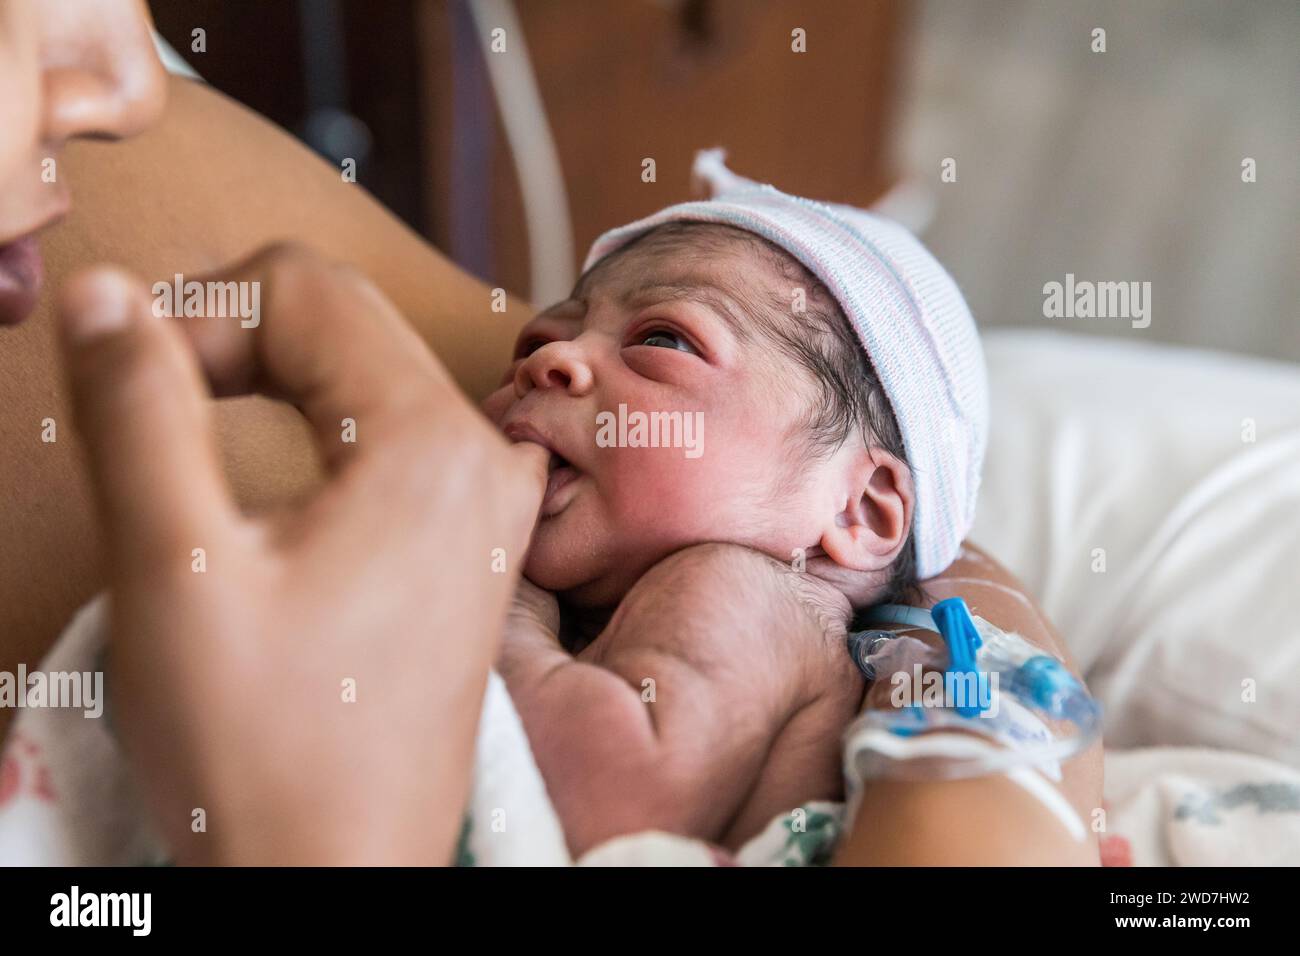 Multiracial newborn baby sucks on mom's finger after being born Stock Photo